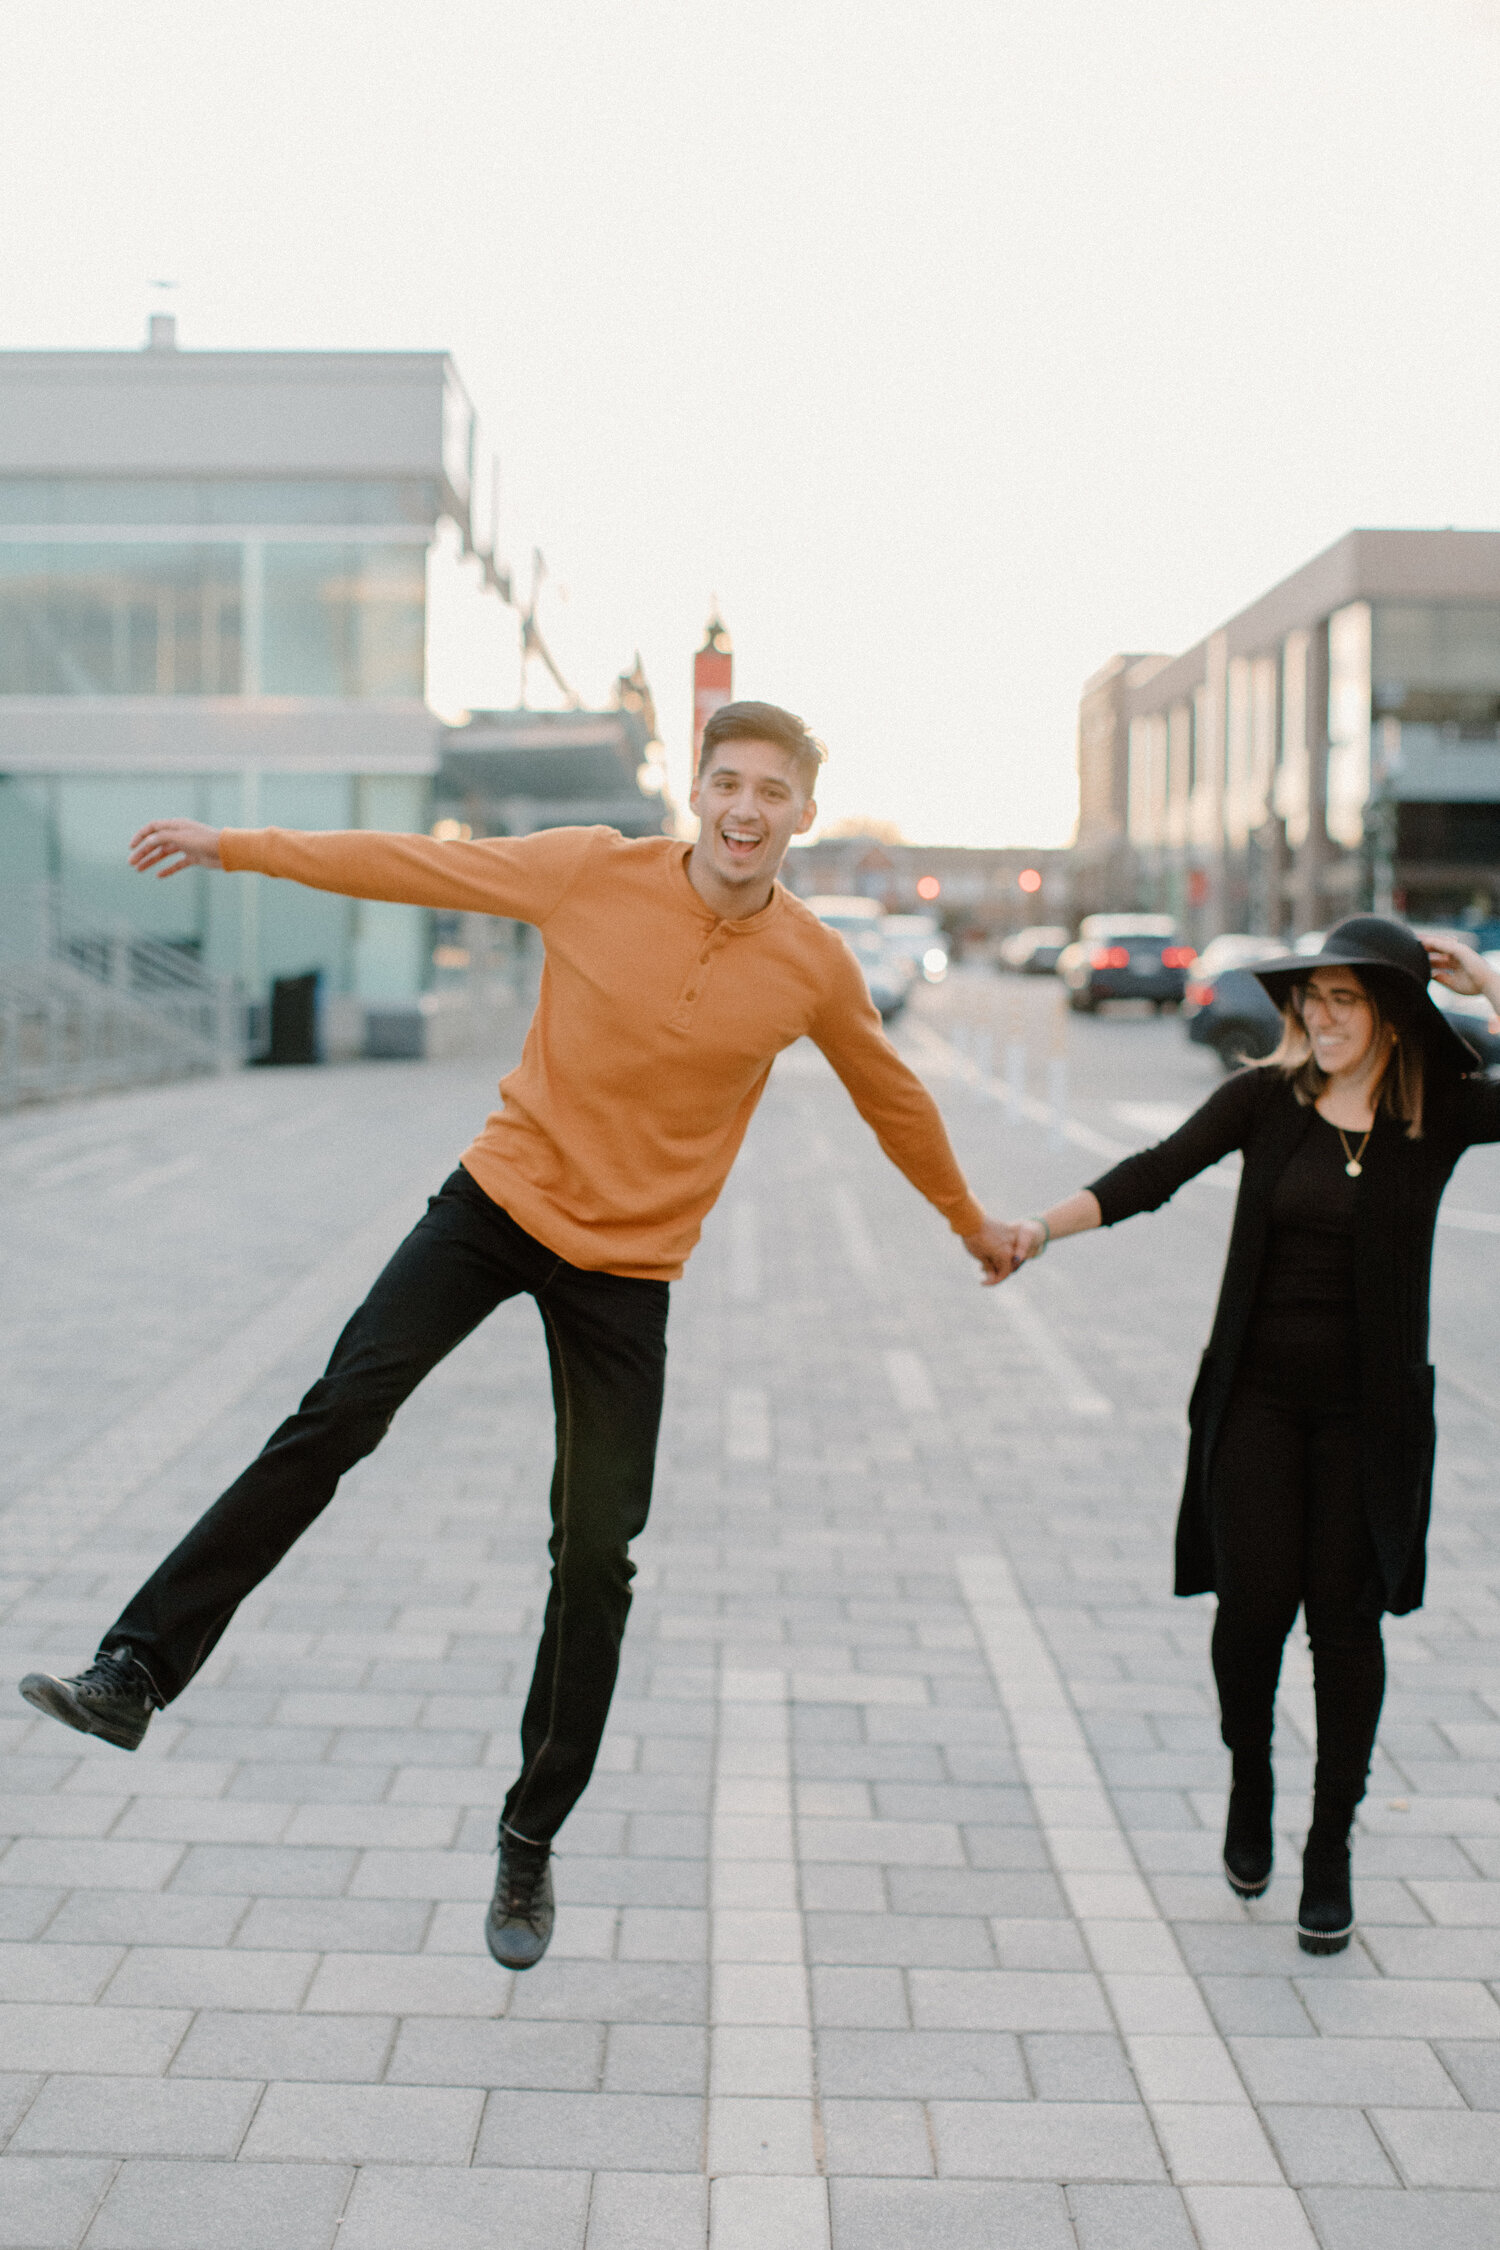  Ottawa, Canada engagement photographer, Chelsea Mason Photography captures this couple skipping happily and playfully down an urban street. engagement photographer ottawa canada black and orange engagement outfit inspiration womens ankle high black 